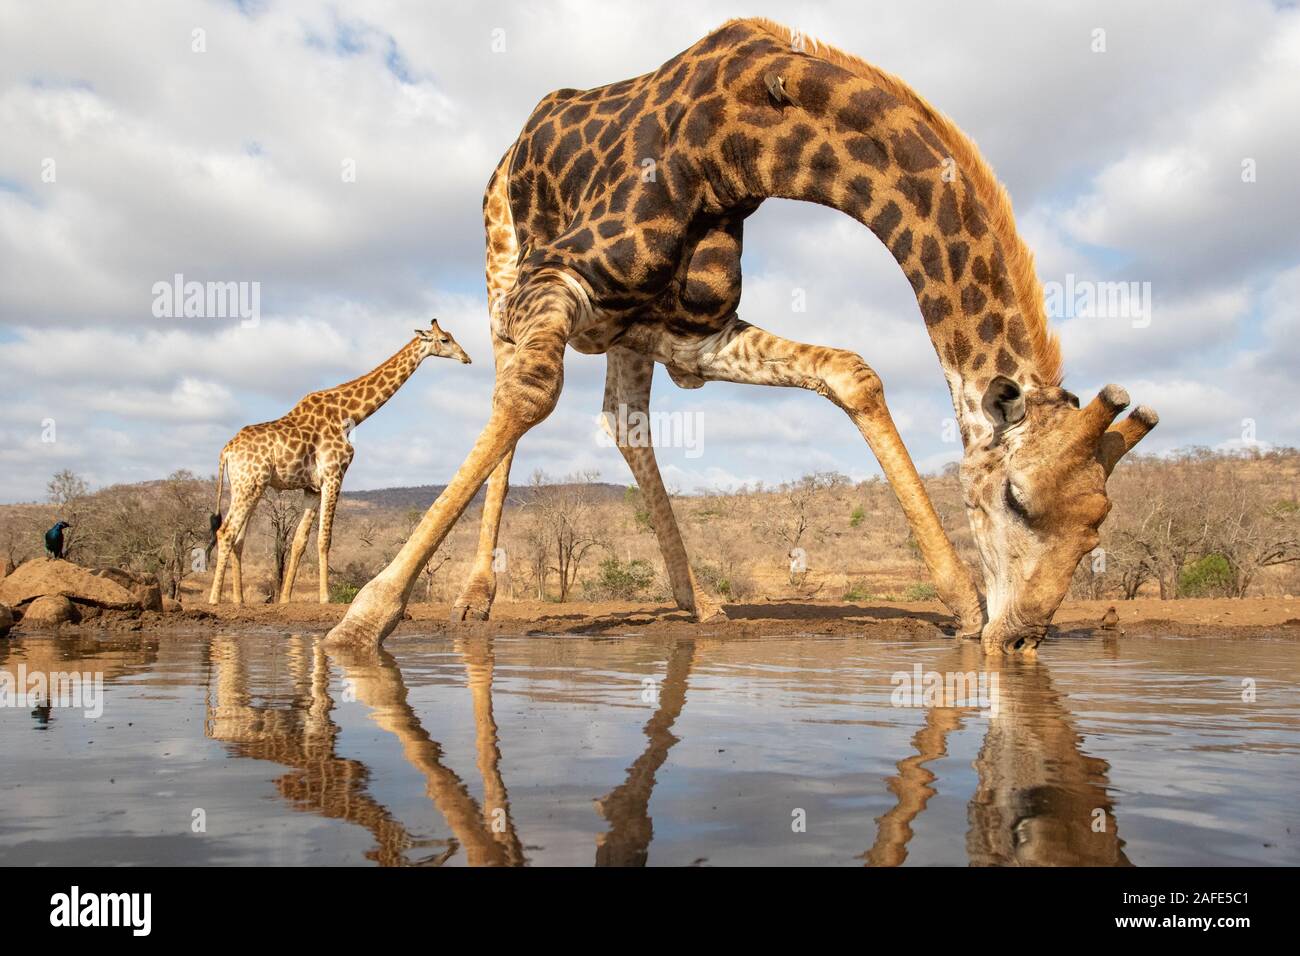 A giraffe bending over drinking from a pool with another in the background Stock Photo